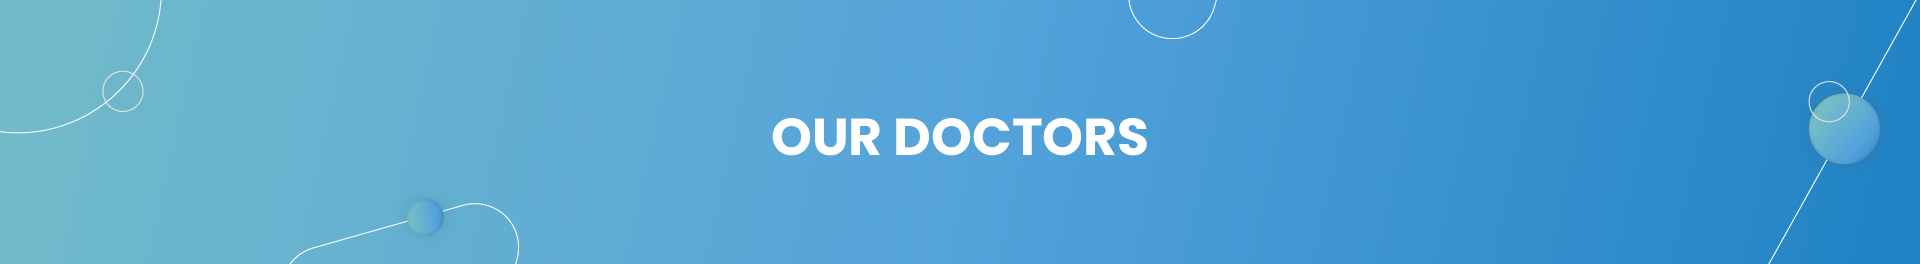 Our Doctors banner